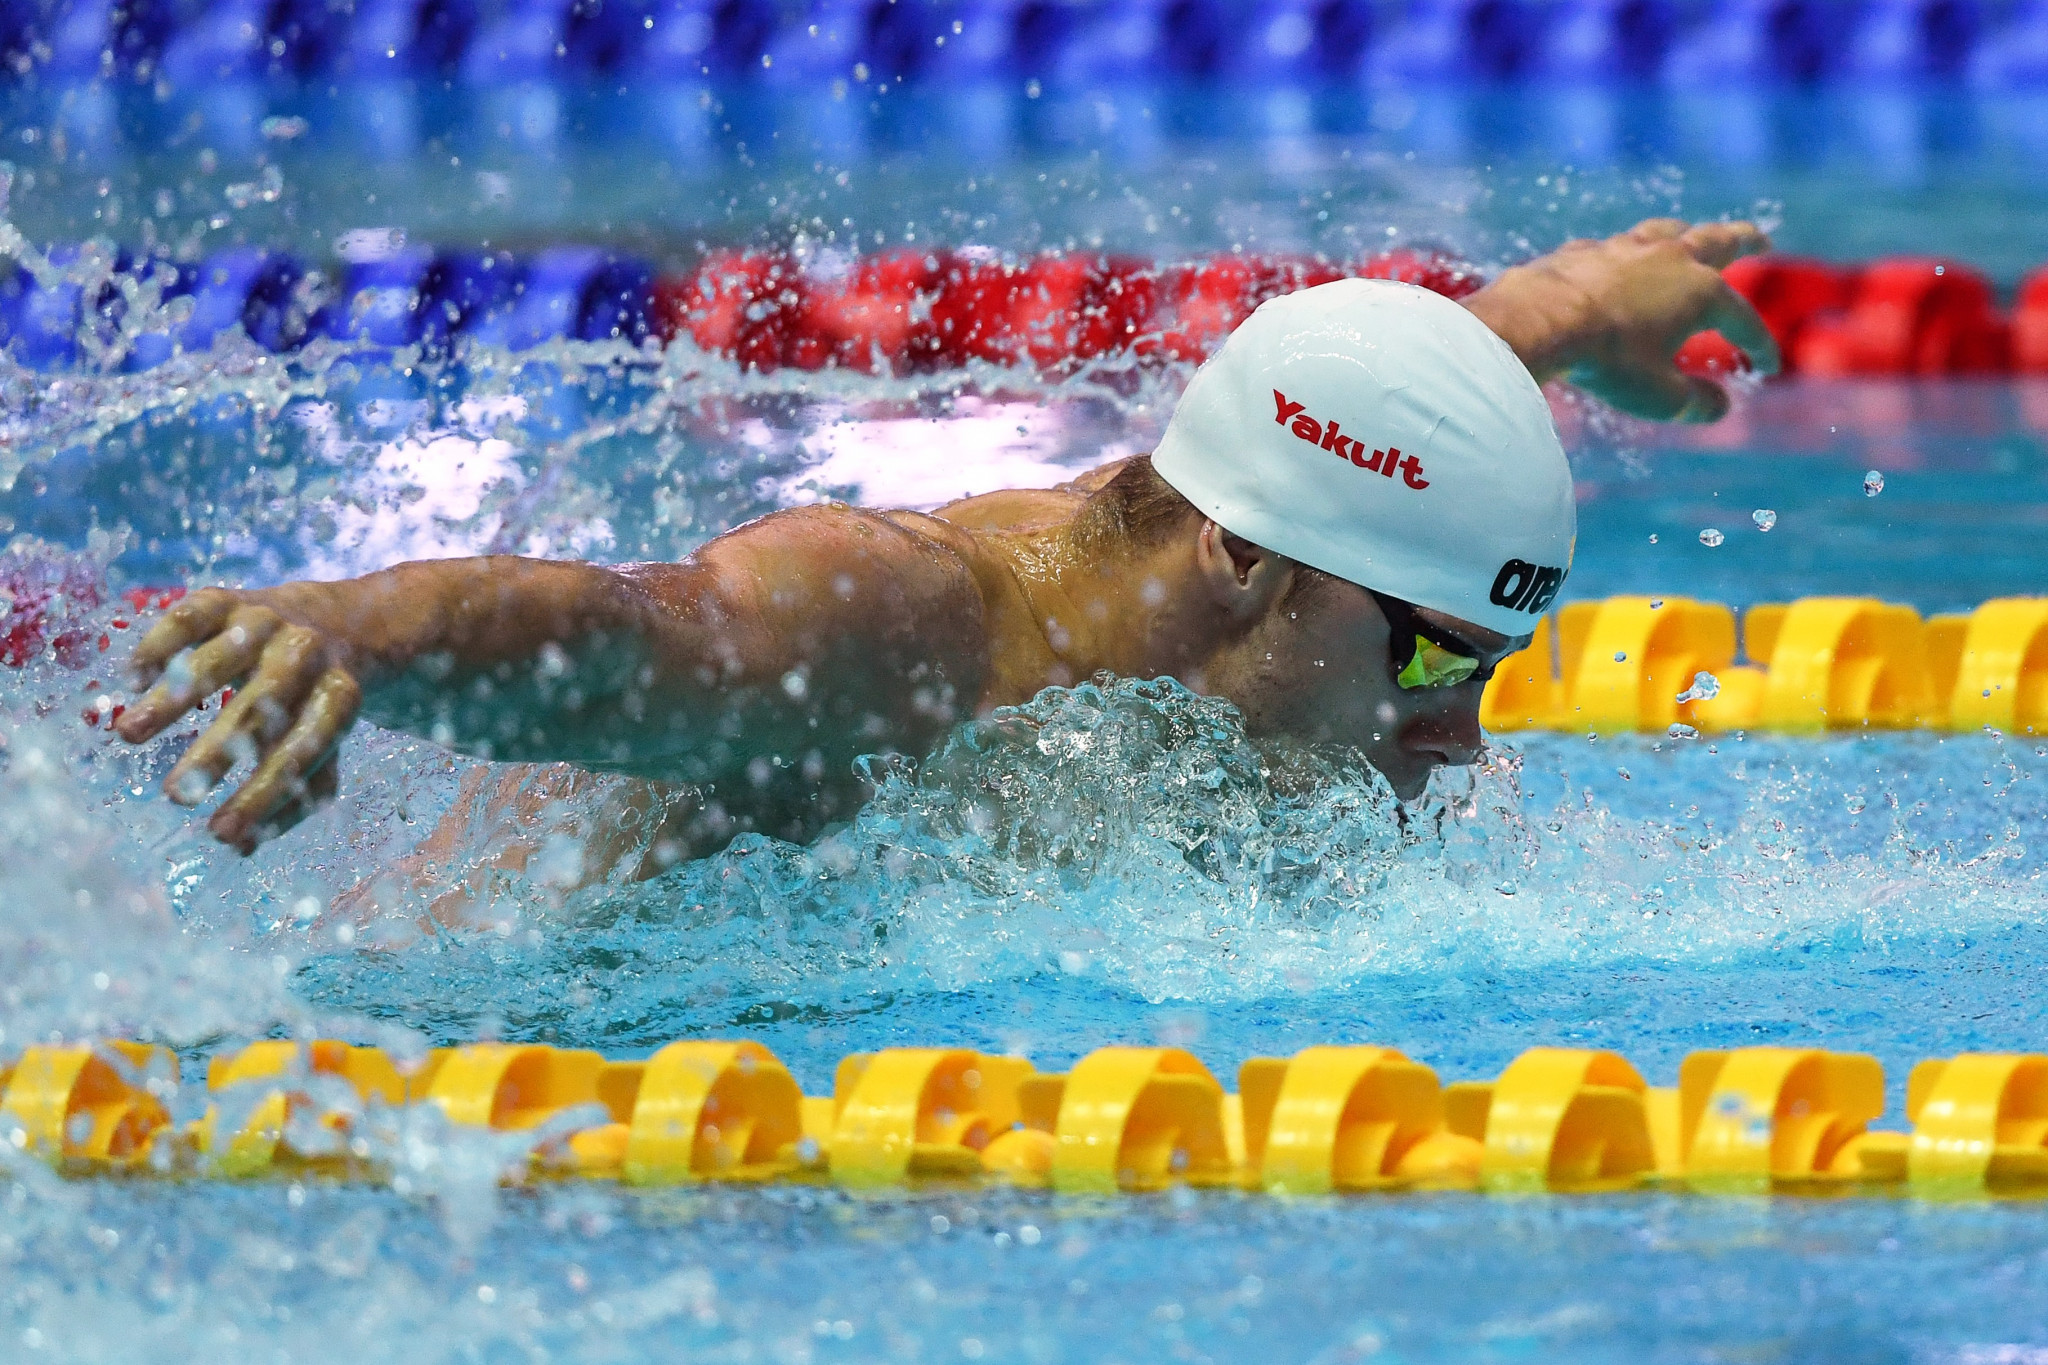 The Hungarian has been competing at the FINA World Aquatics Championships in Gwangju ©Getty Images